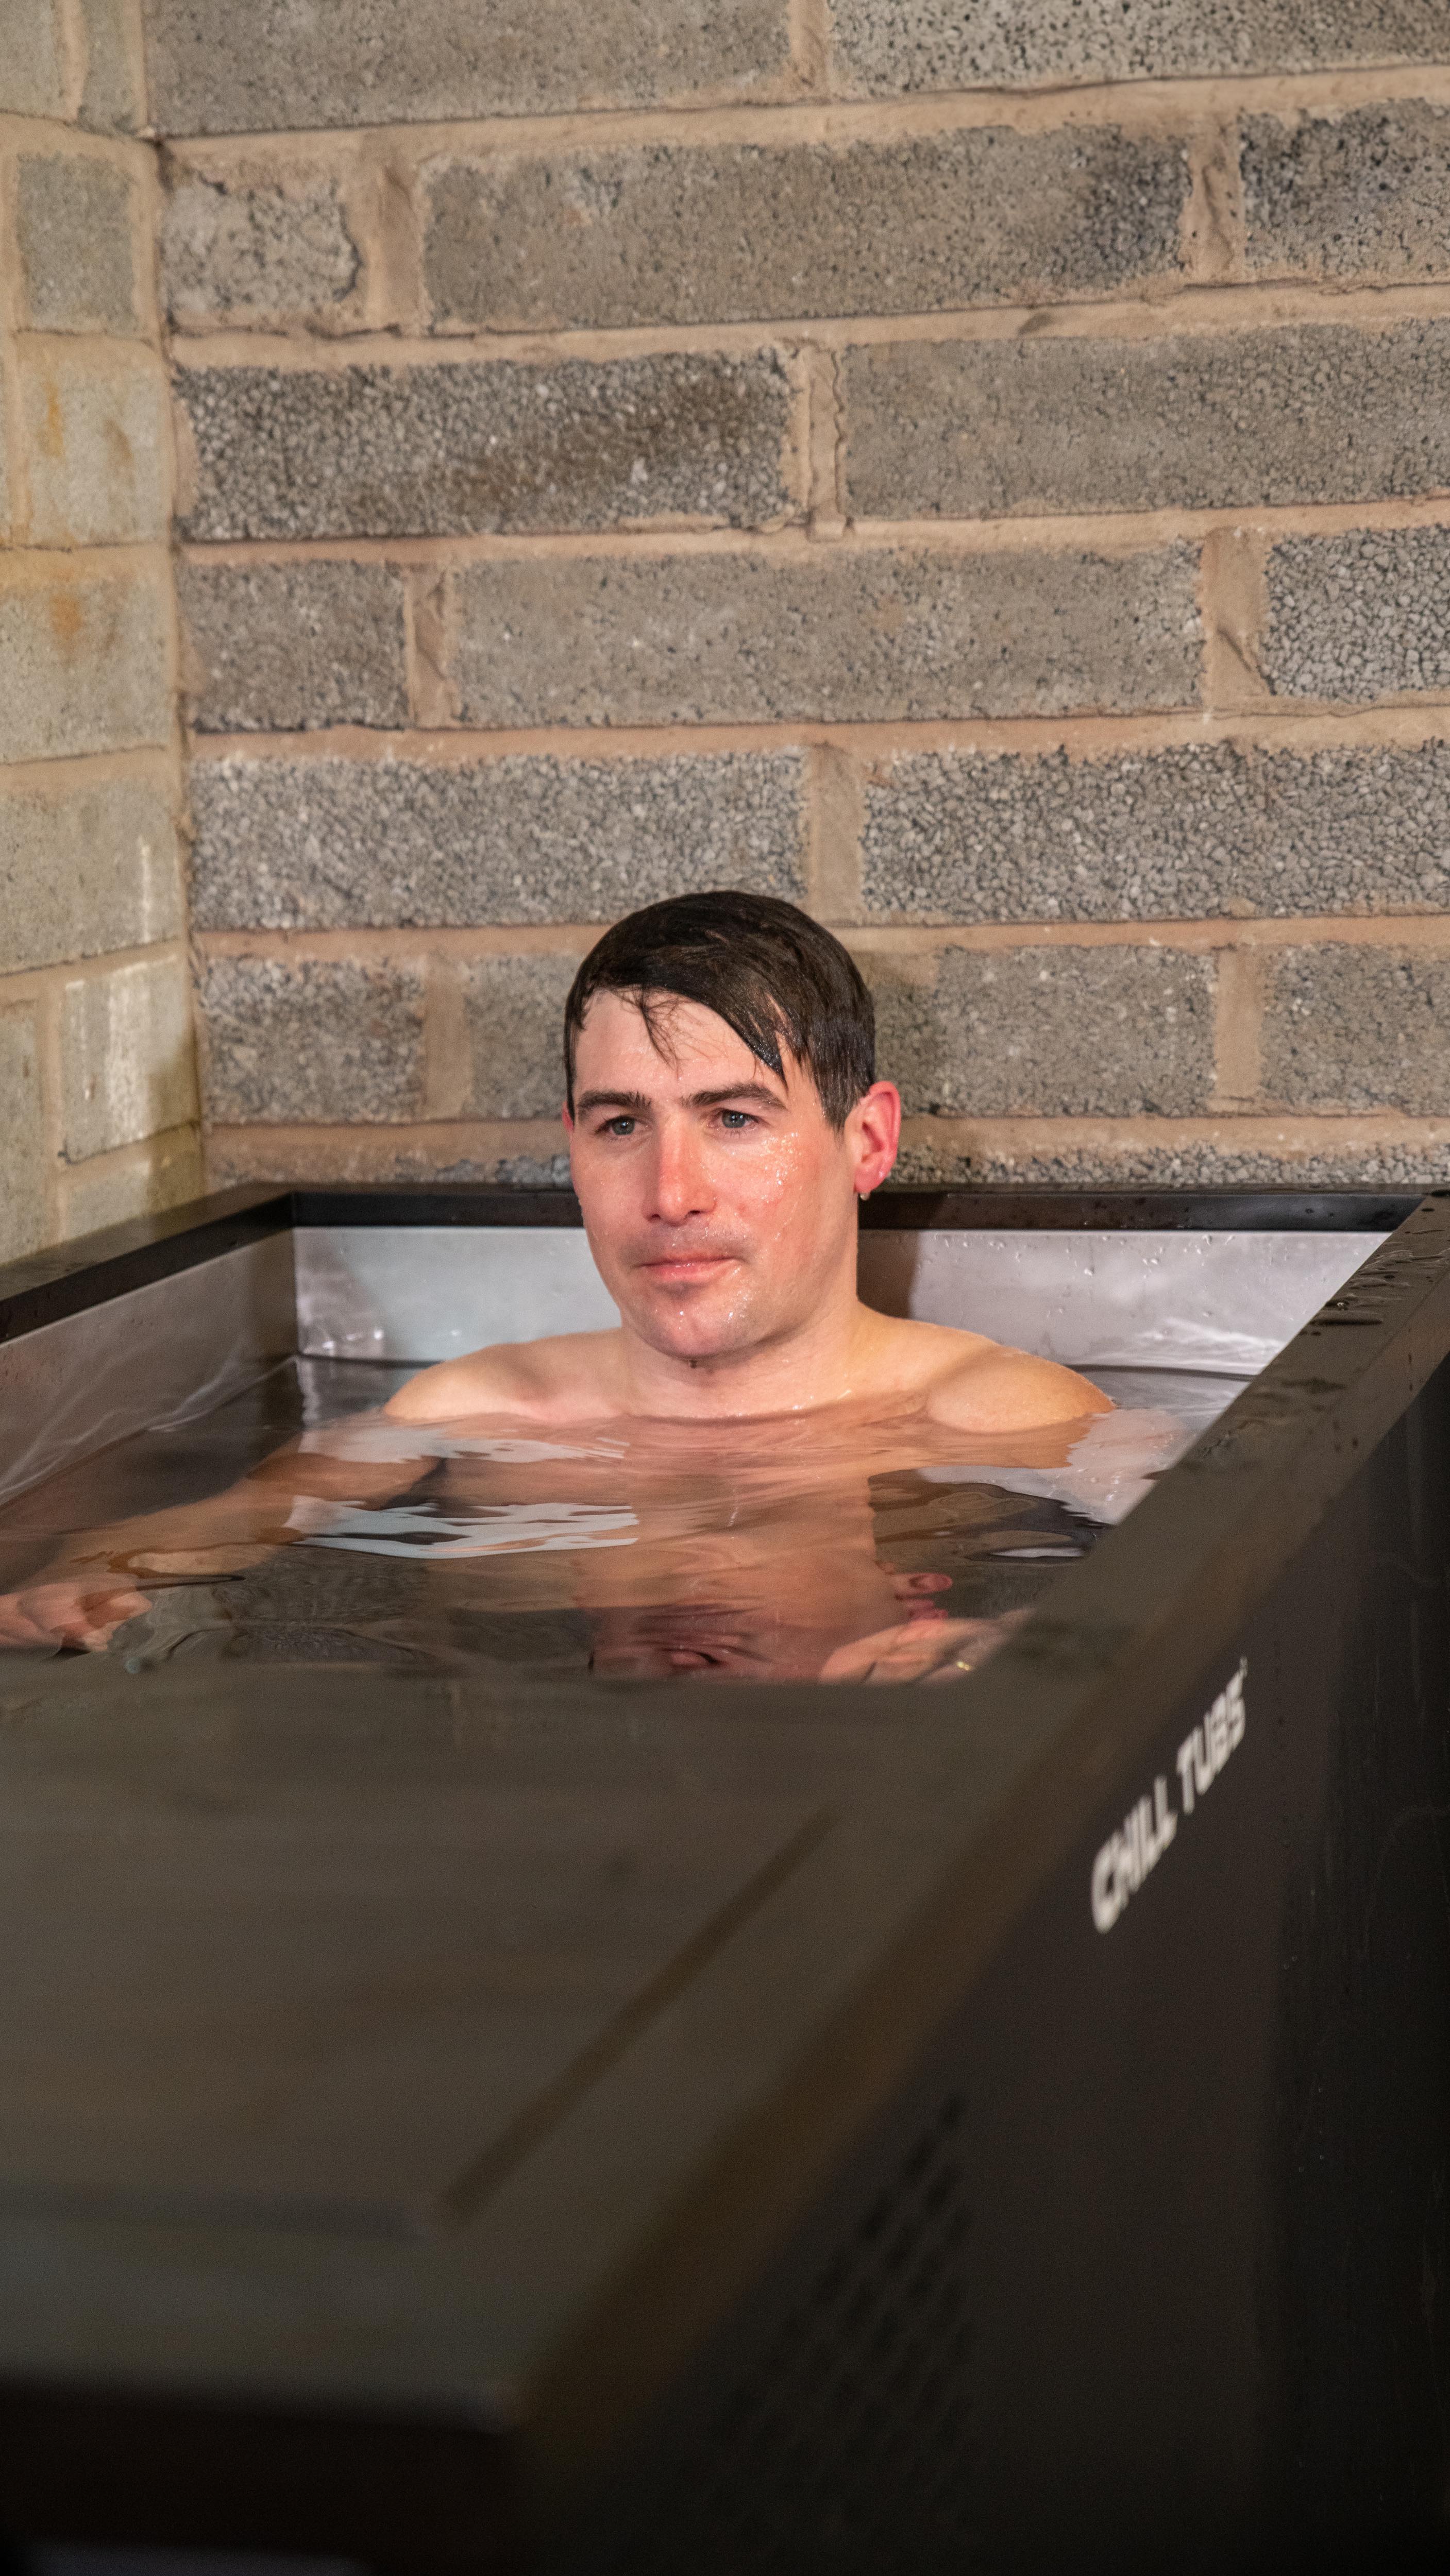 Ryan Mania x Chill Tubs       We ve teamed up with @ryan mania   2013 Grand National Winner and Advanced Hot Tubs and Swim Spas.   The Scottish jockey won the 2013 Grand National on his first ride out at Aintree on 66-1 shot Auroras Encore. The ice bath is a vital part of Ryan   s regime to support his recovery after training and enhance his performance.  Ryan said   Just before I head to Aintree I used my Chill Tub. It really helps with keeping my muscles right and clearing my head for the long drive.   I will be using it tonight when I get home to help keep the aches and pains at bay. It also helps me sleep better. I have been using the Chill Tub for a while and it is absolutely brilliant.   Improve your health today and start your cold water journey with a Chill Tub - LINK IN BIO          #chilltub #chilltubs #icebath #icebaths #coldwater #coldwatertherapy #coldwaterimmersion #coldplunge #mentalhealth #wellbeing #grandnational